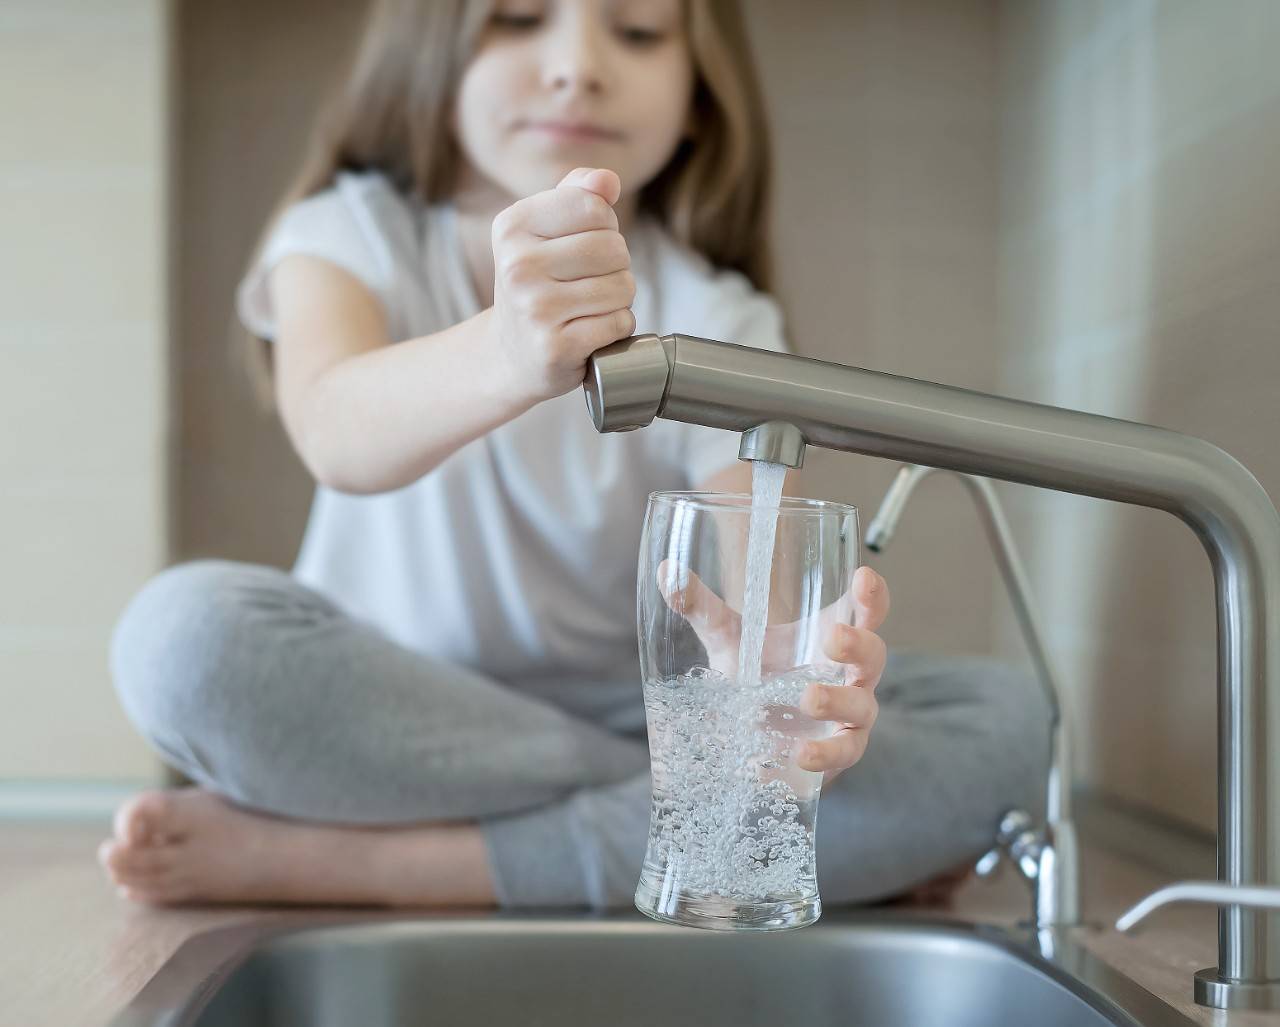 A little girl saving water by using a modern faucet to care for the environment